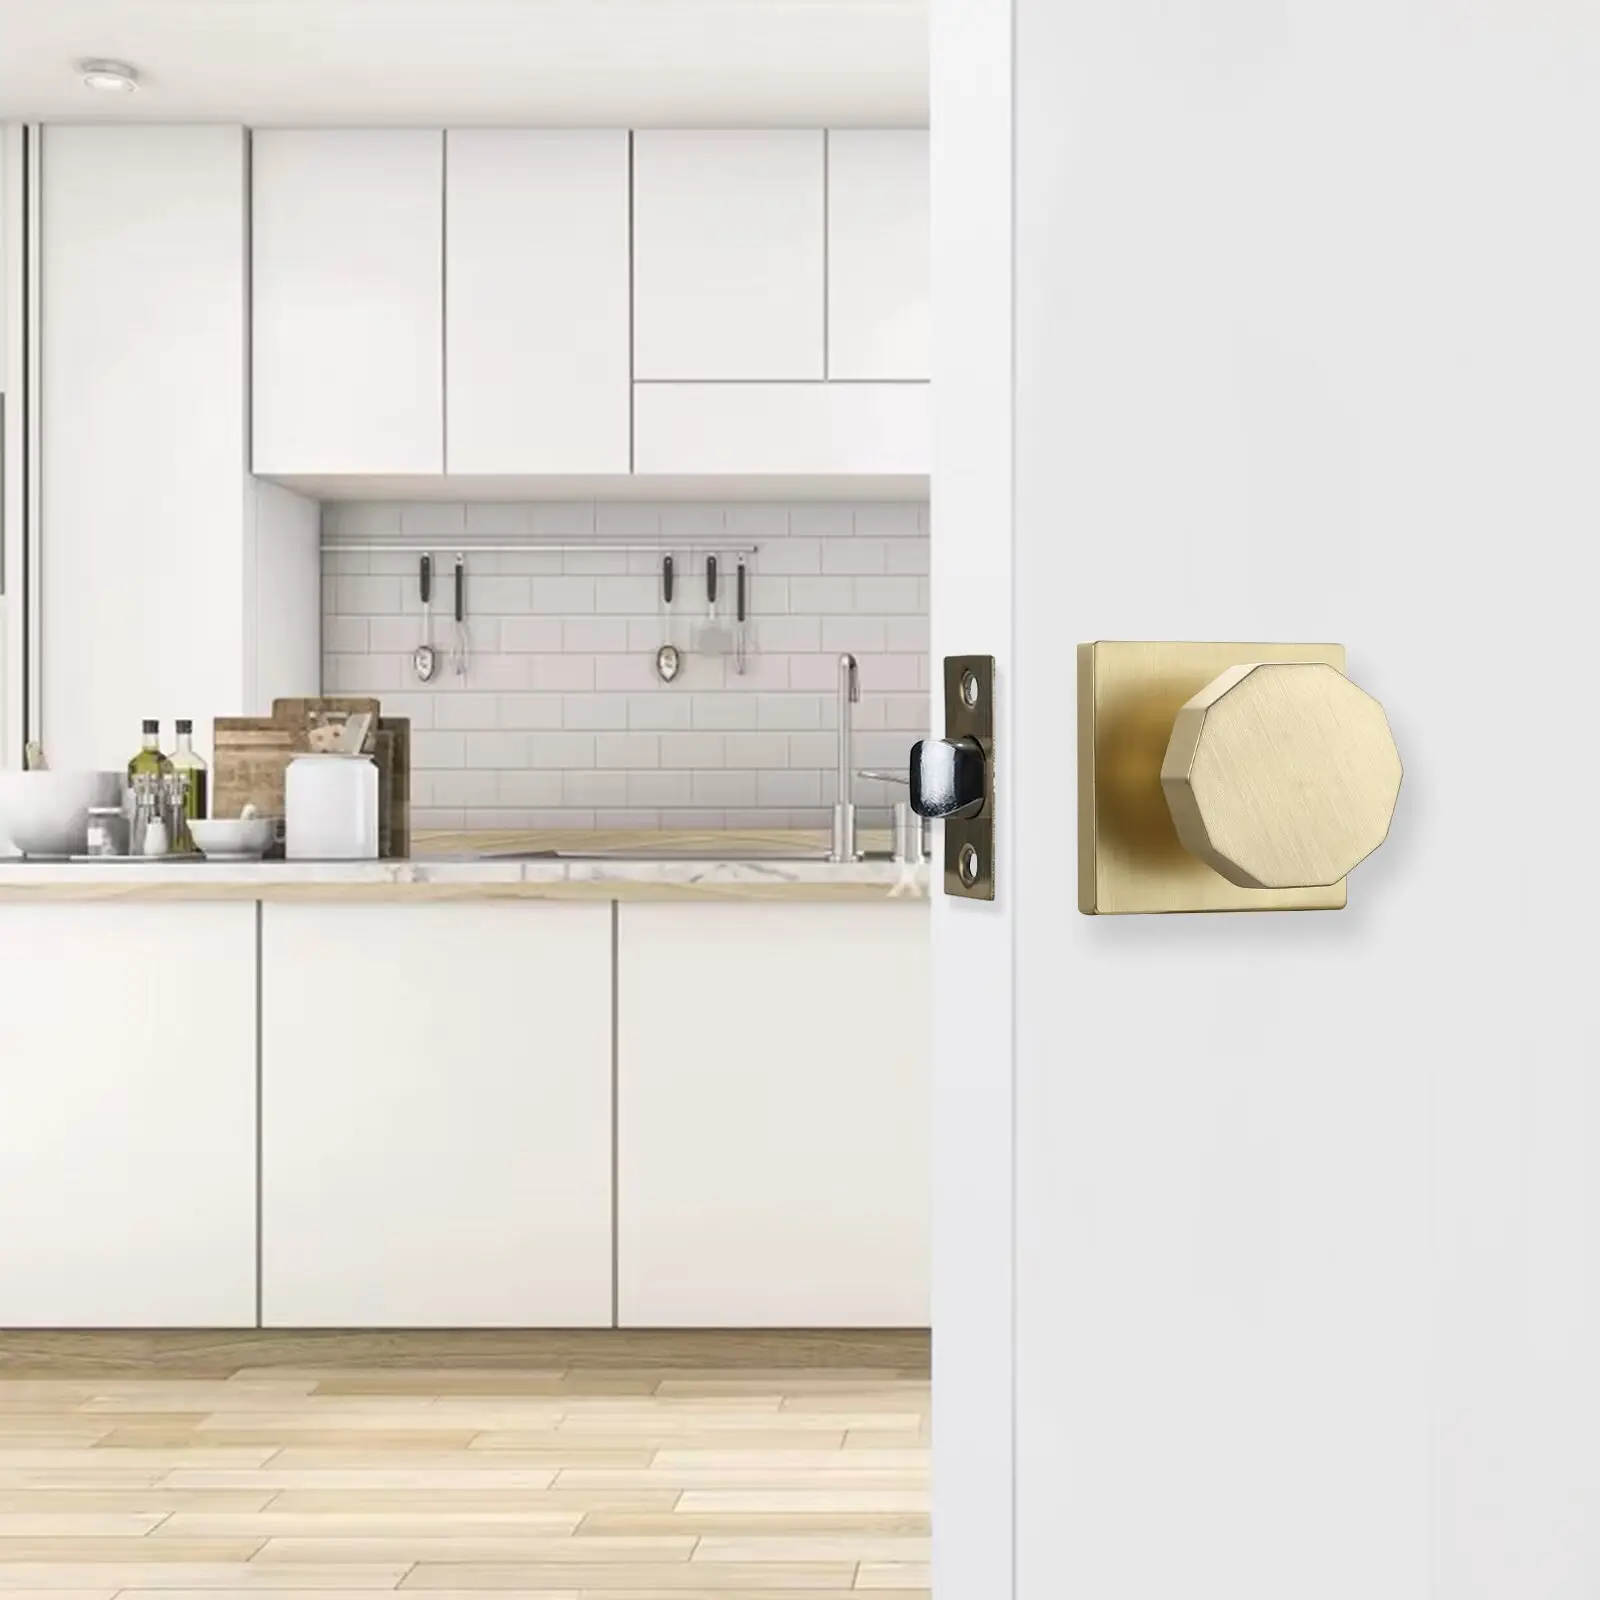 Quality Reasonable Price Brushed Brass Bathroom Door Knob for Modern Privacy